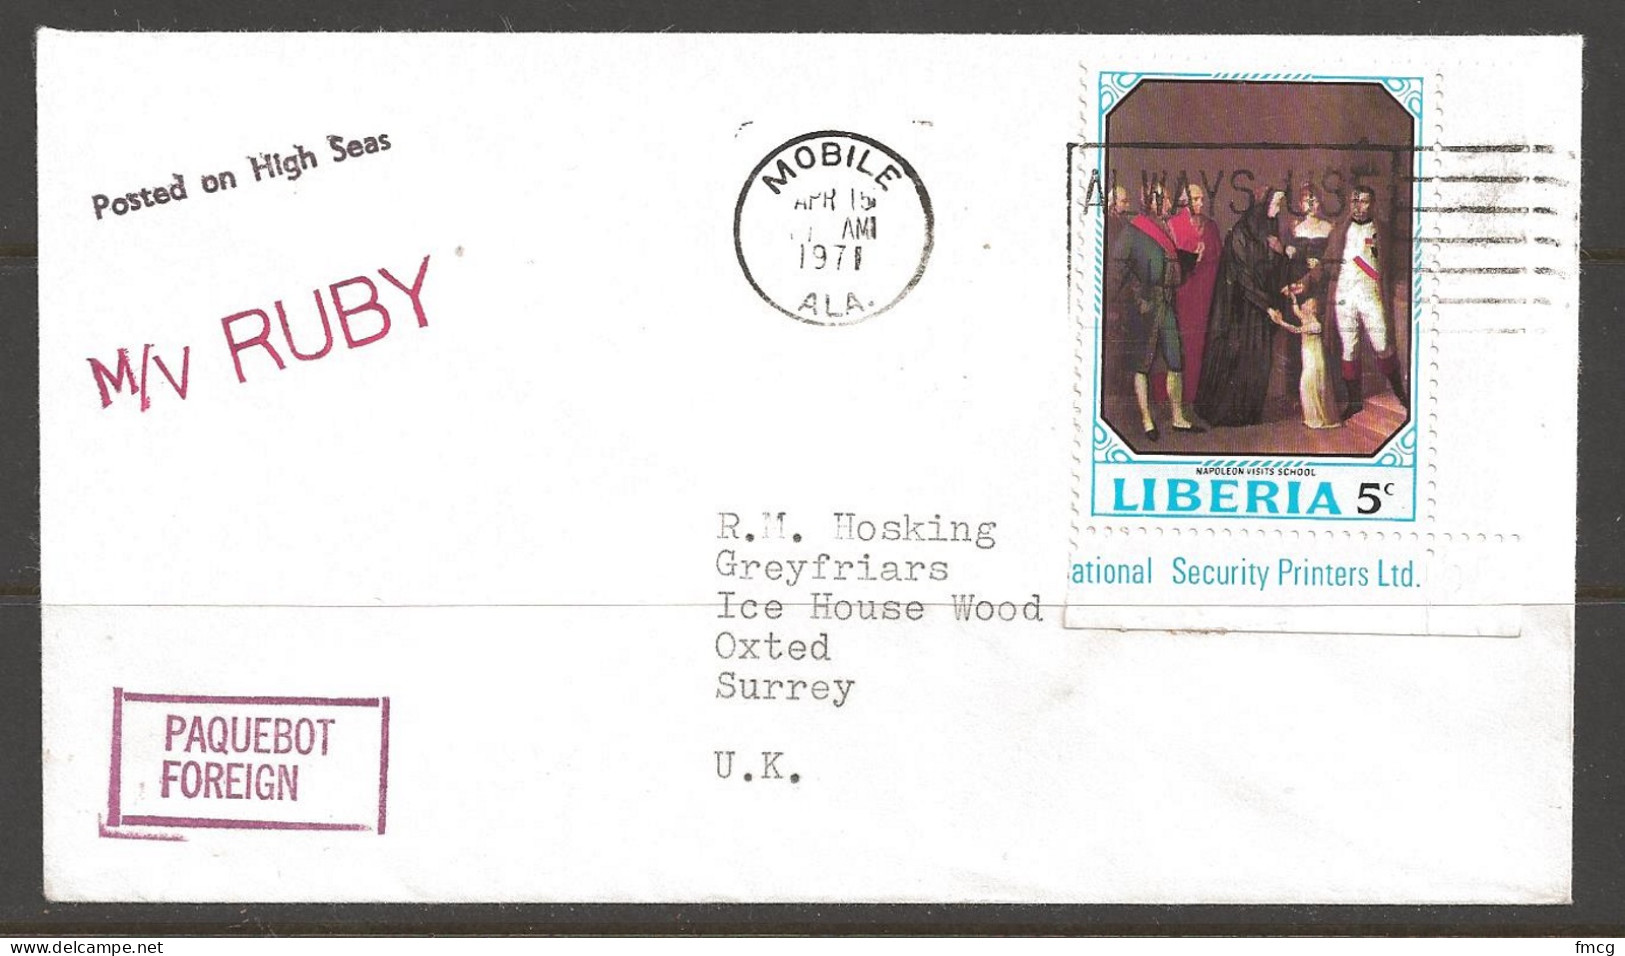 1971 Paquebot Cover Liberia Stamp Used In Mobile, Alabama (Apr 15) - Covers & Documents